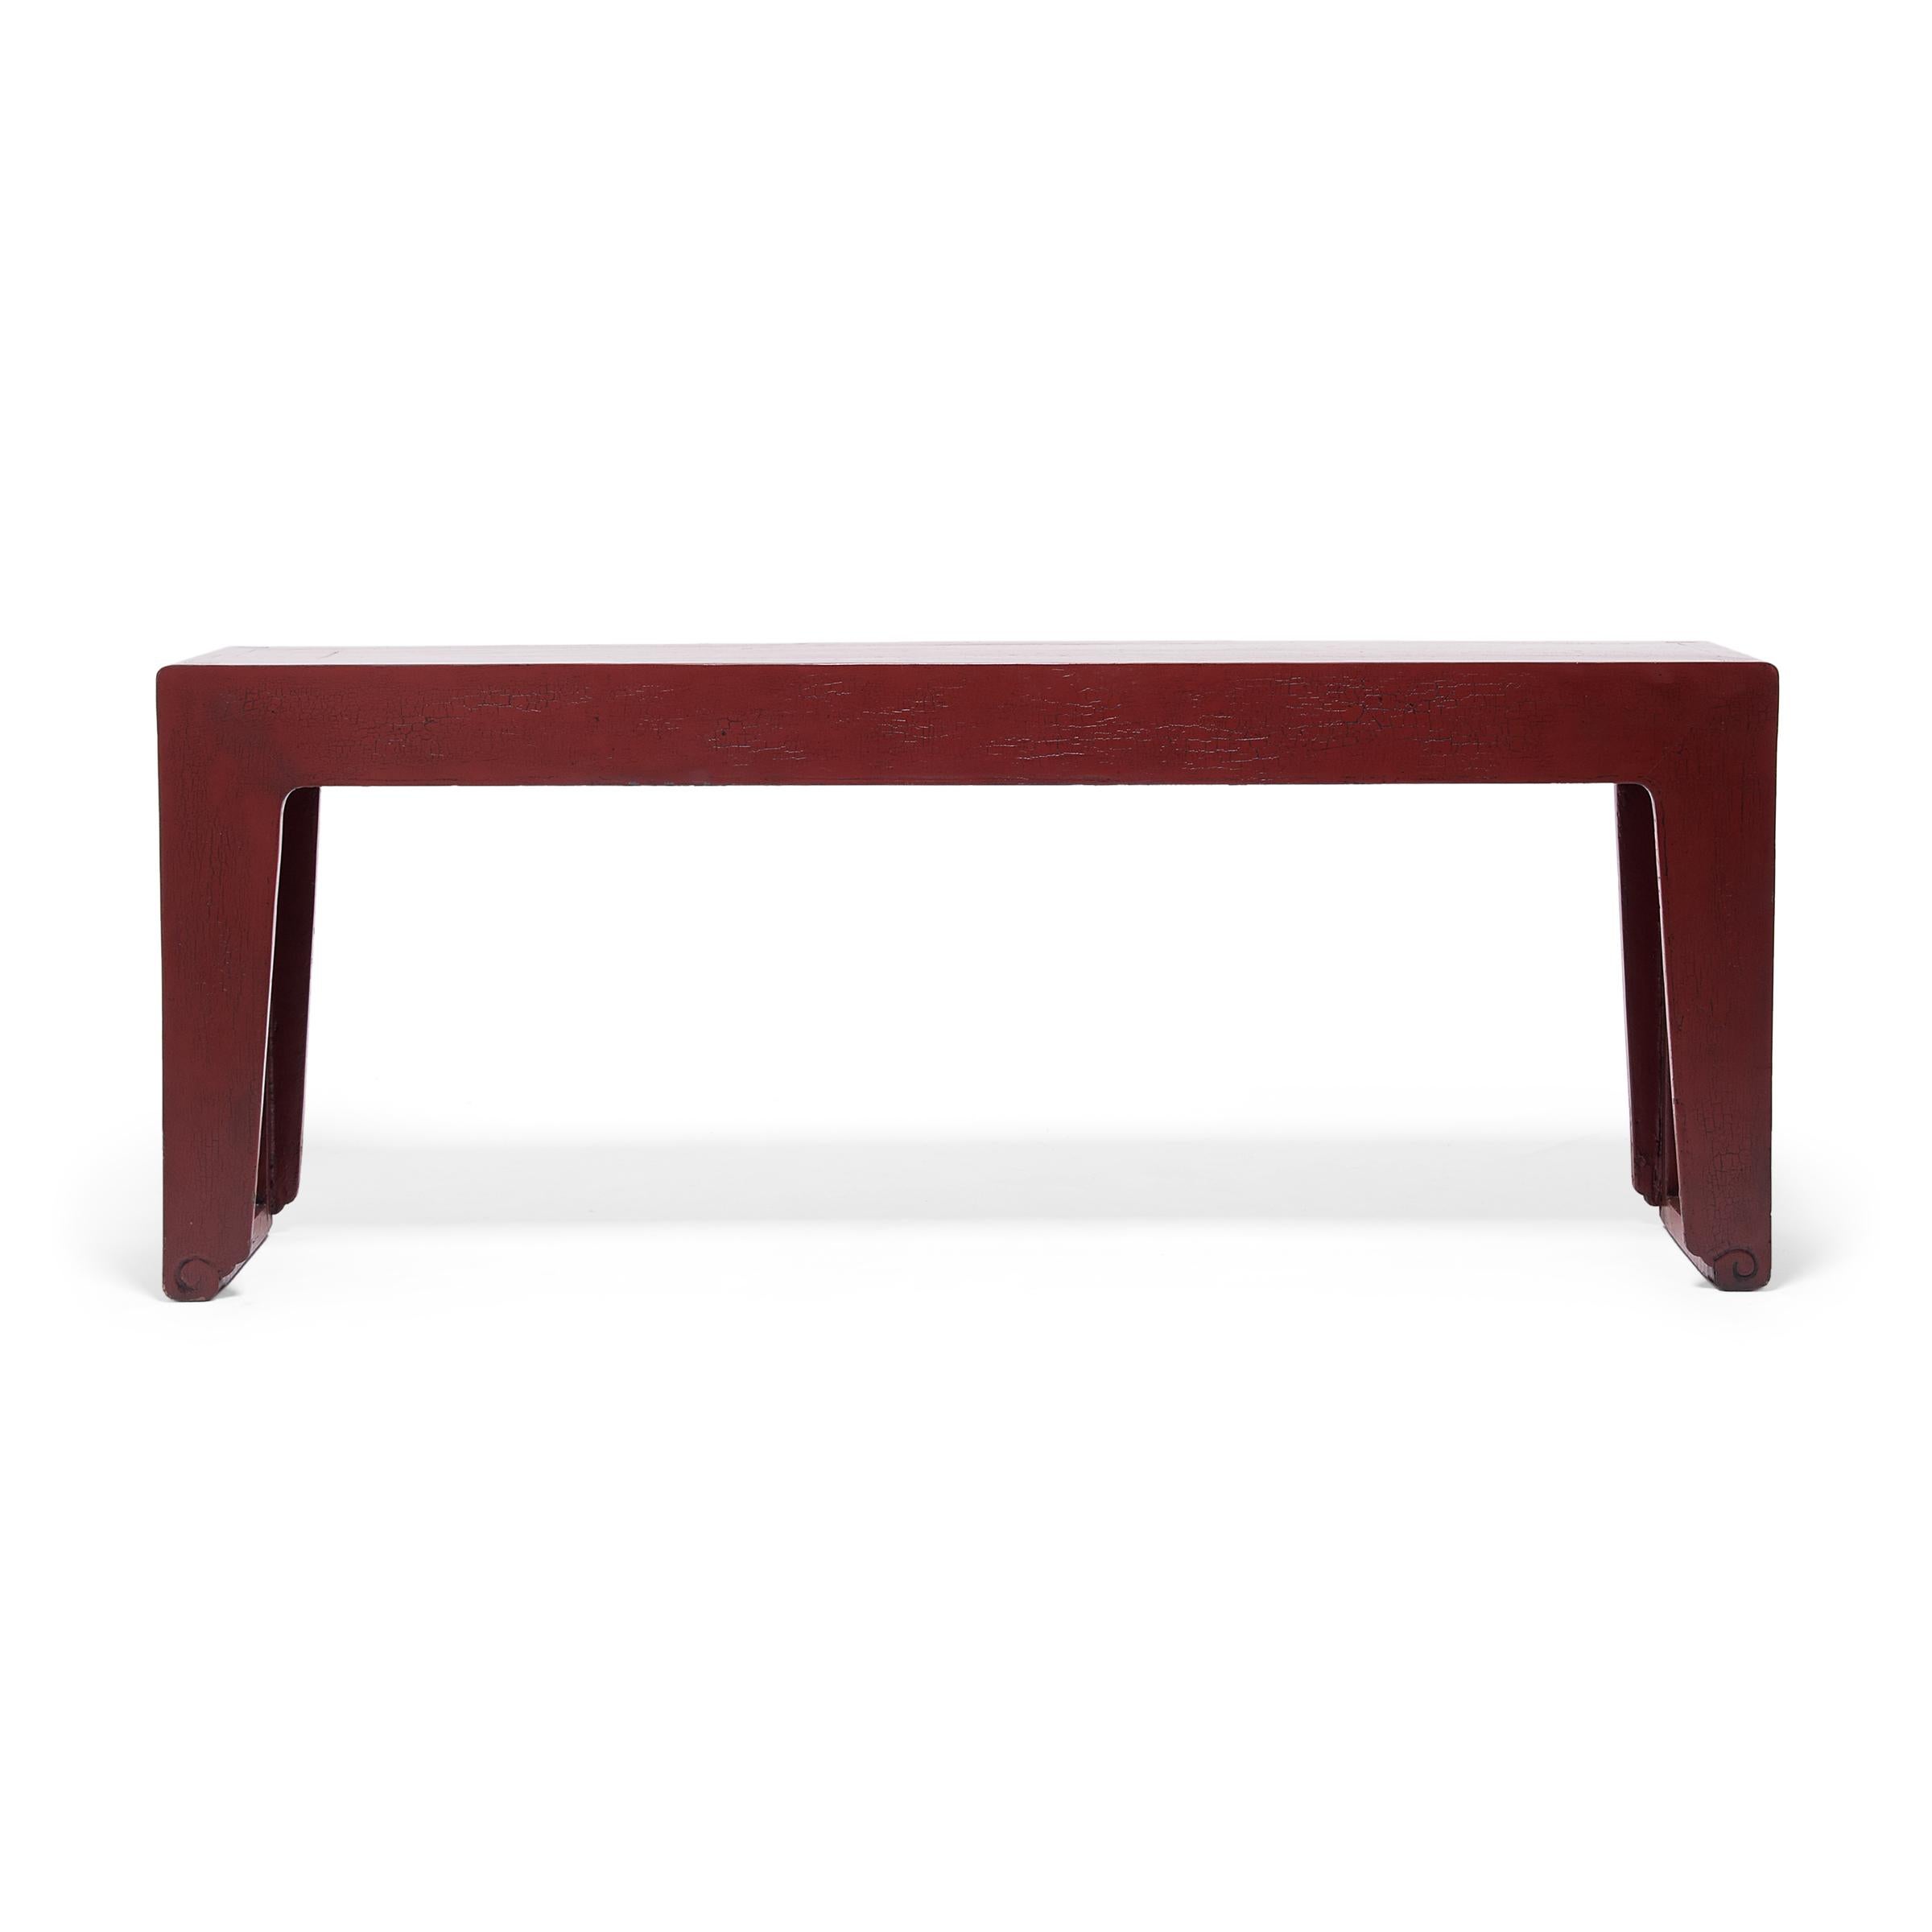 Dated to the early 20th century, this red lacquer console table has a unique waterfall design, the top flowing into the sides as one continuous ribbon. The table is minimally decorated, featuring scrolled feet and a simple apron influenced by the